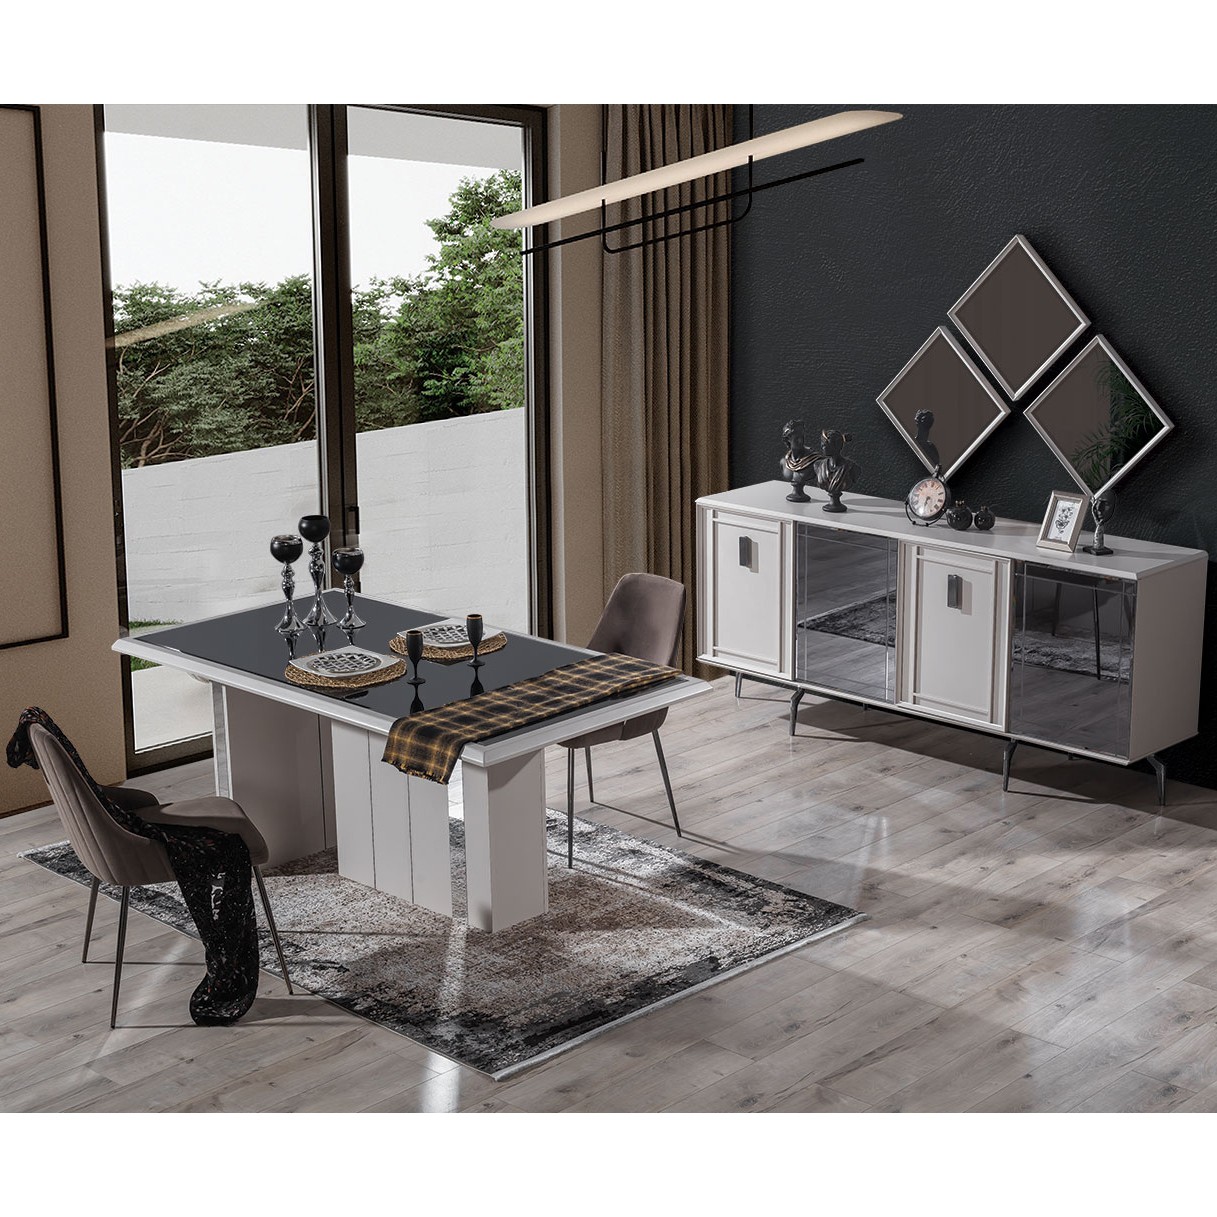 Elizmo Dining Table